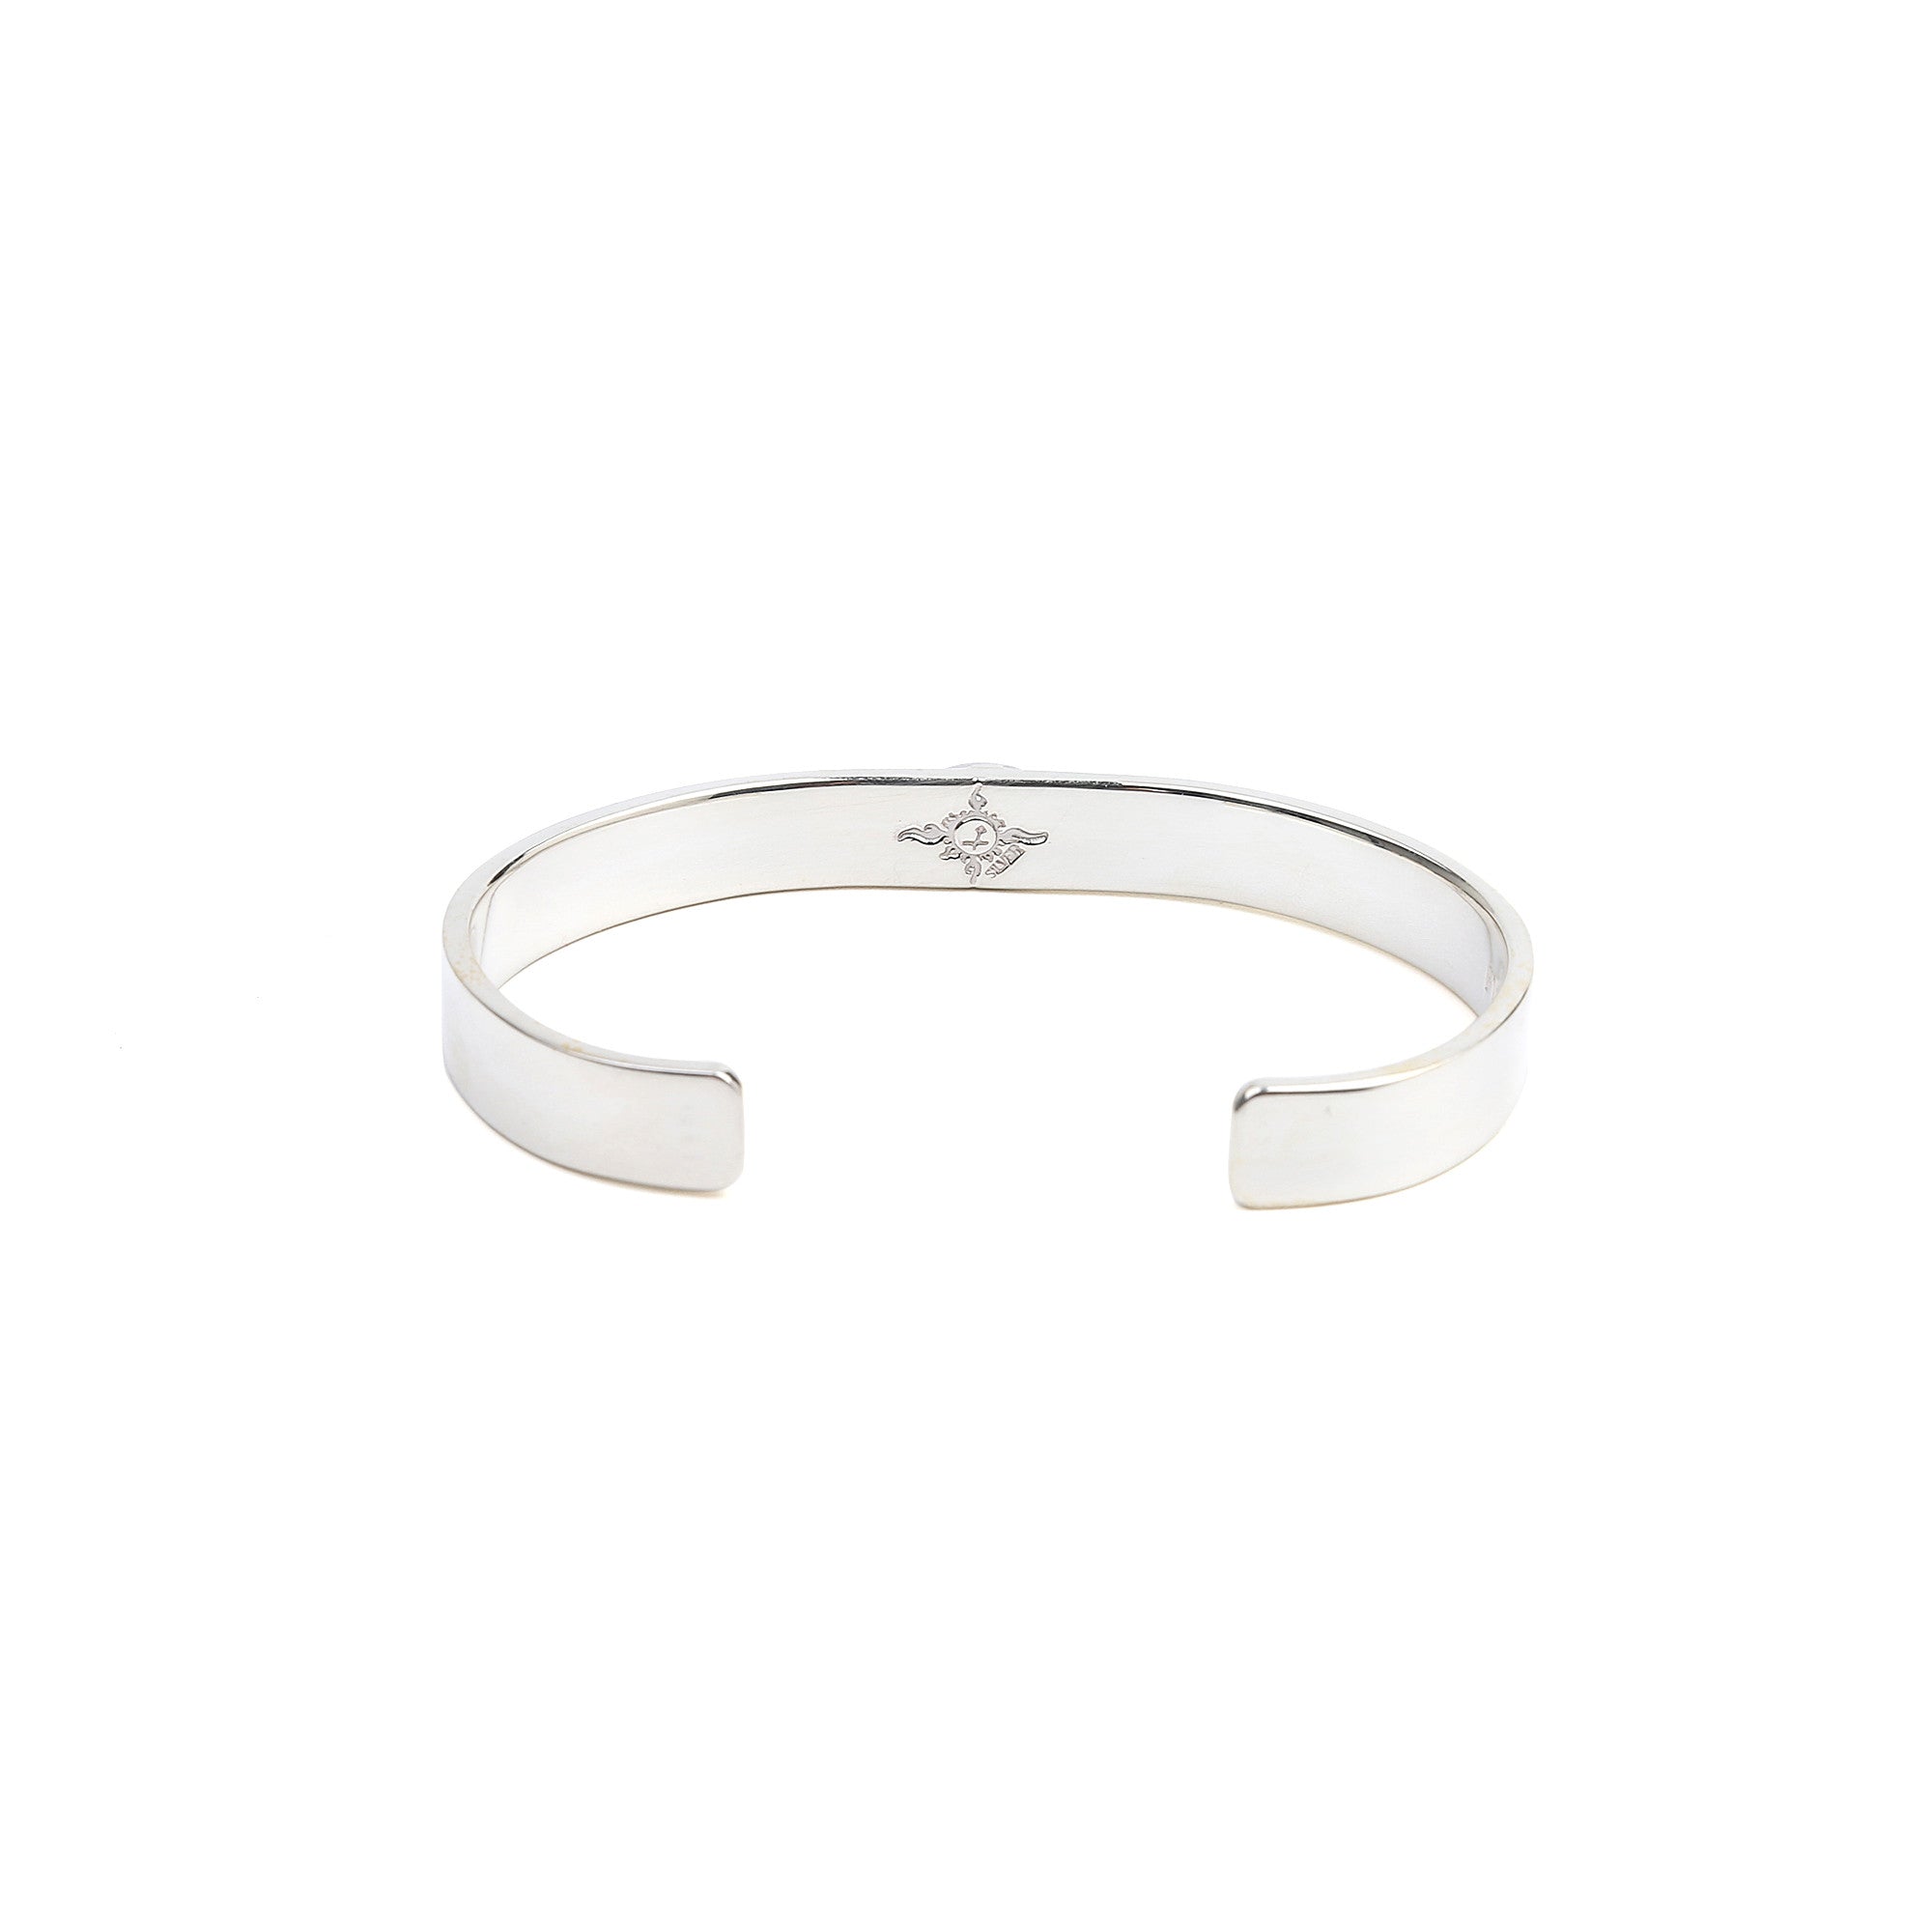 First Arrow's 8mm "Soulo" Bangle